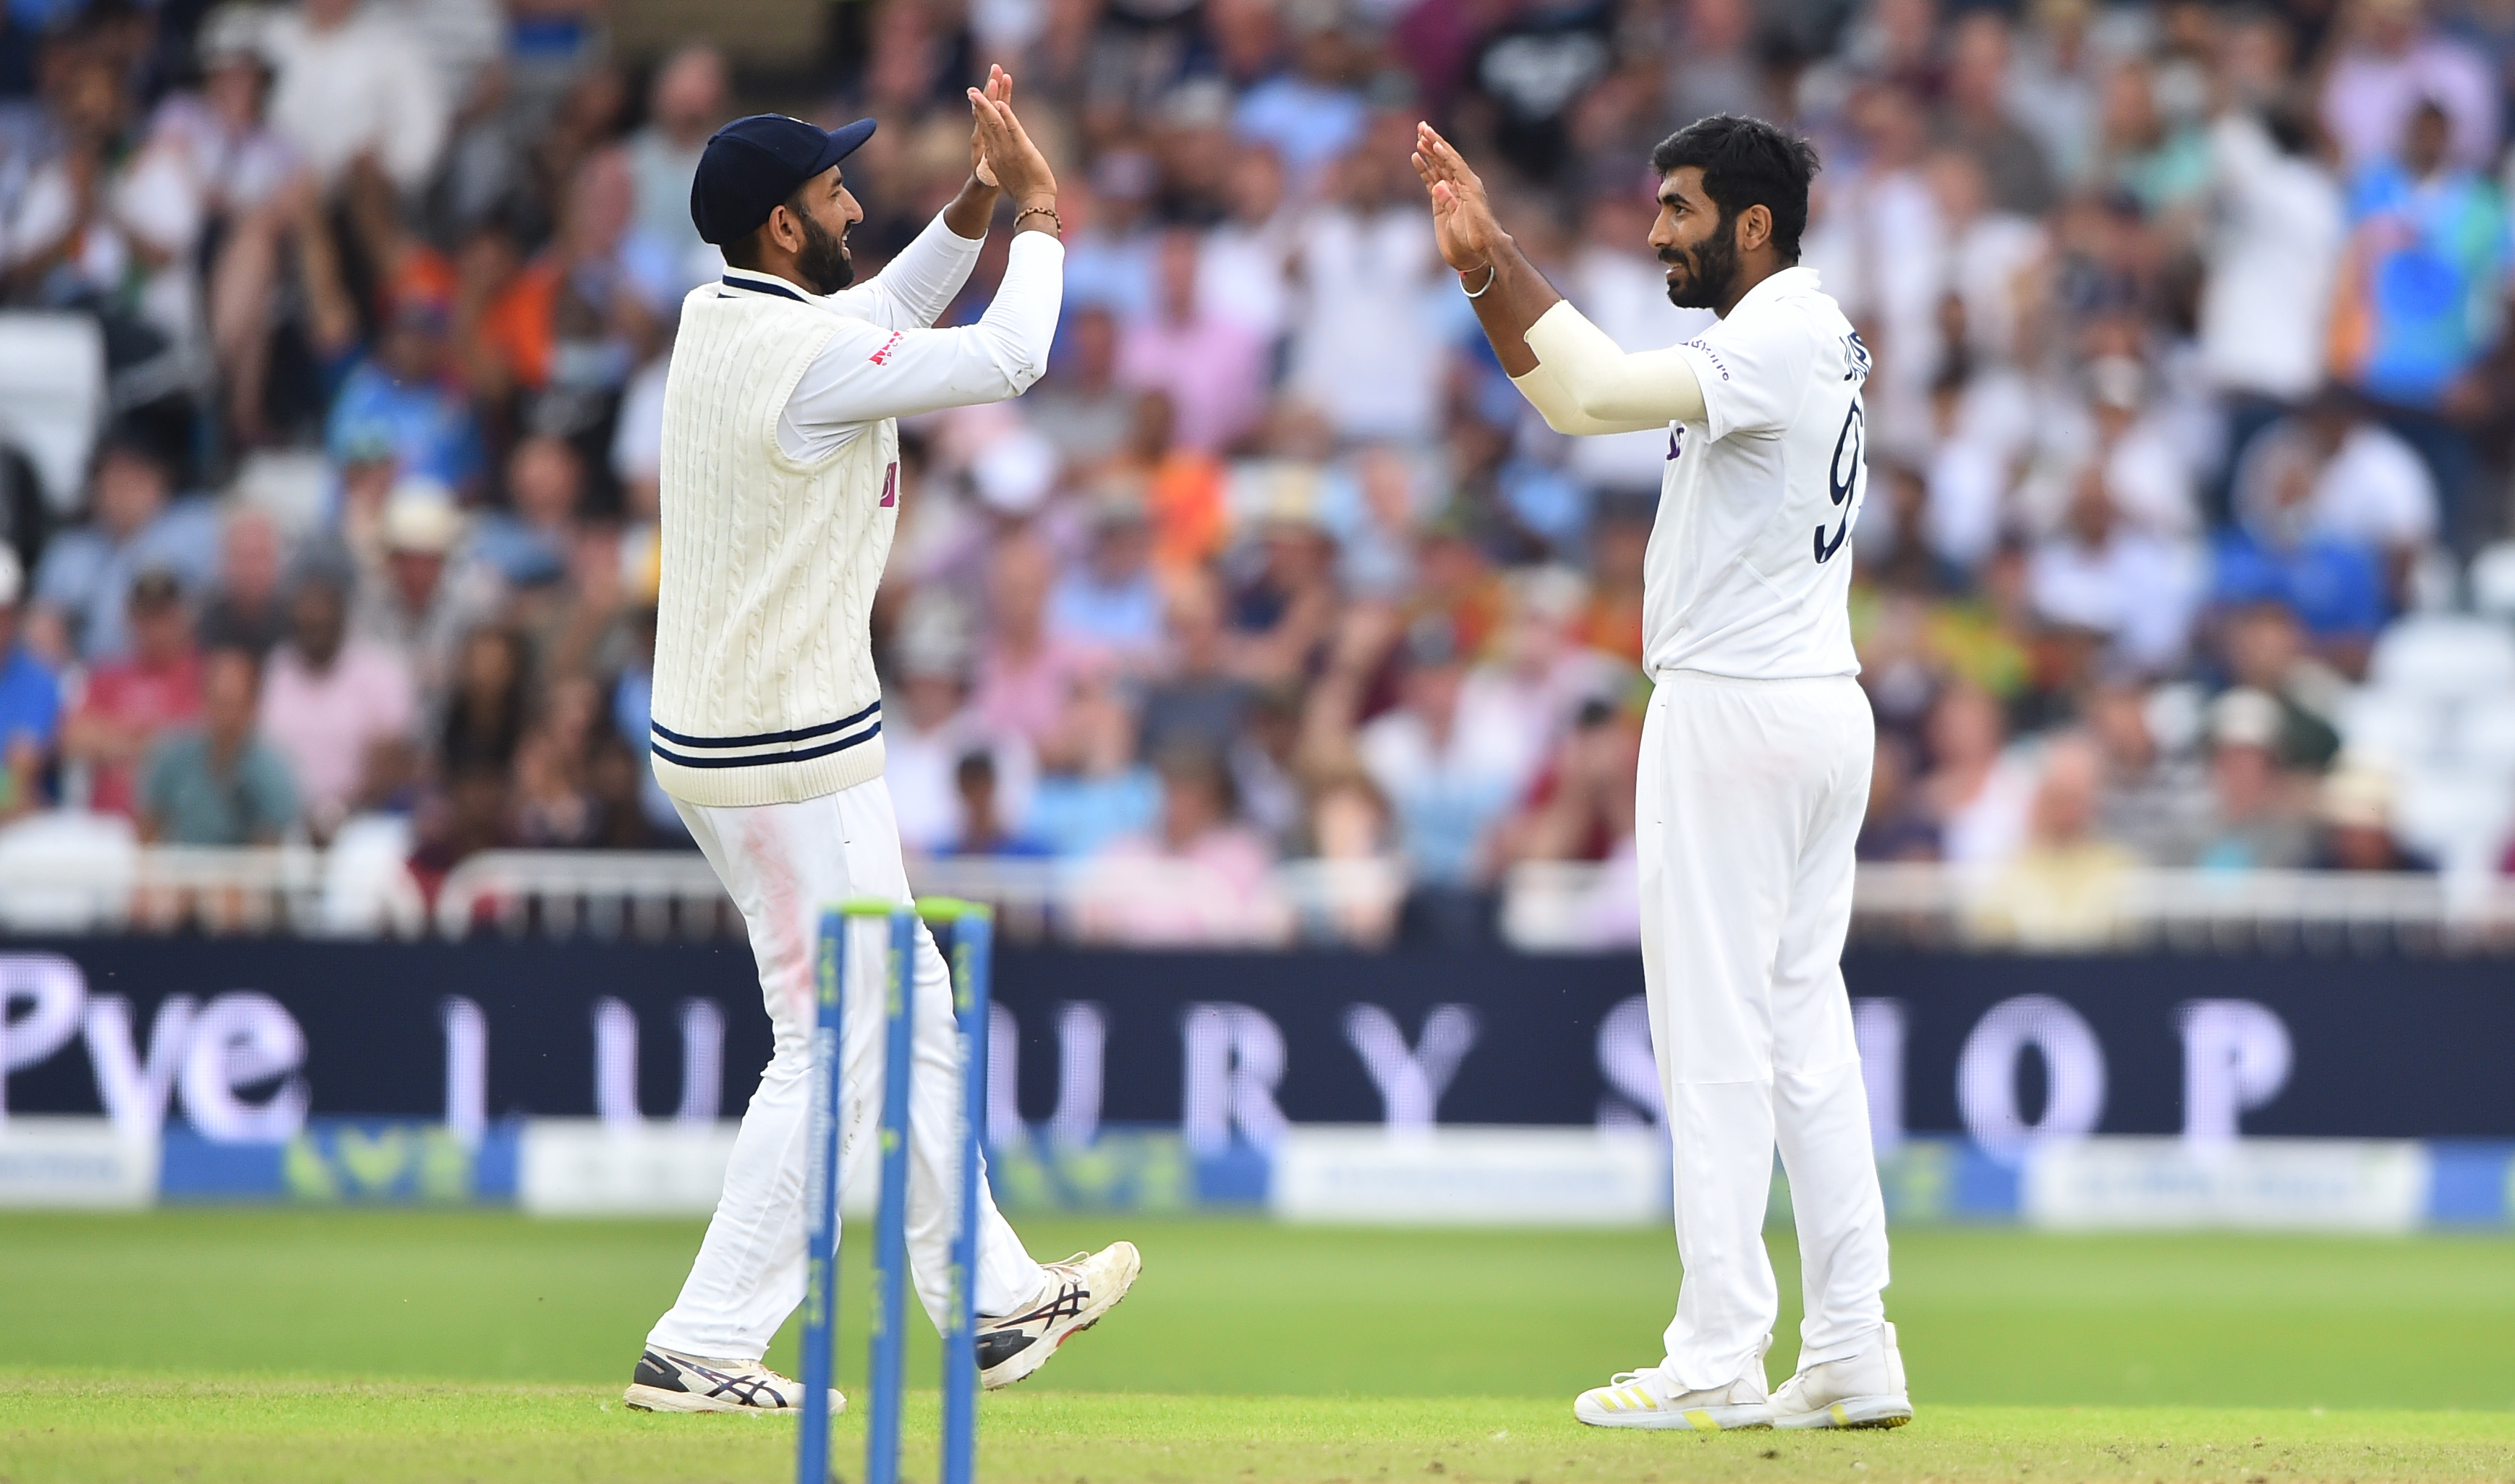 ENG vs IND | Trent Bridge Day 1 Talking Points: Bumrah’s quick turnaround, Root’s home issues and undercooked England